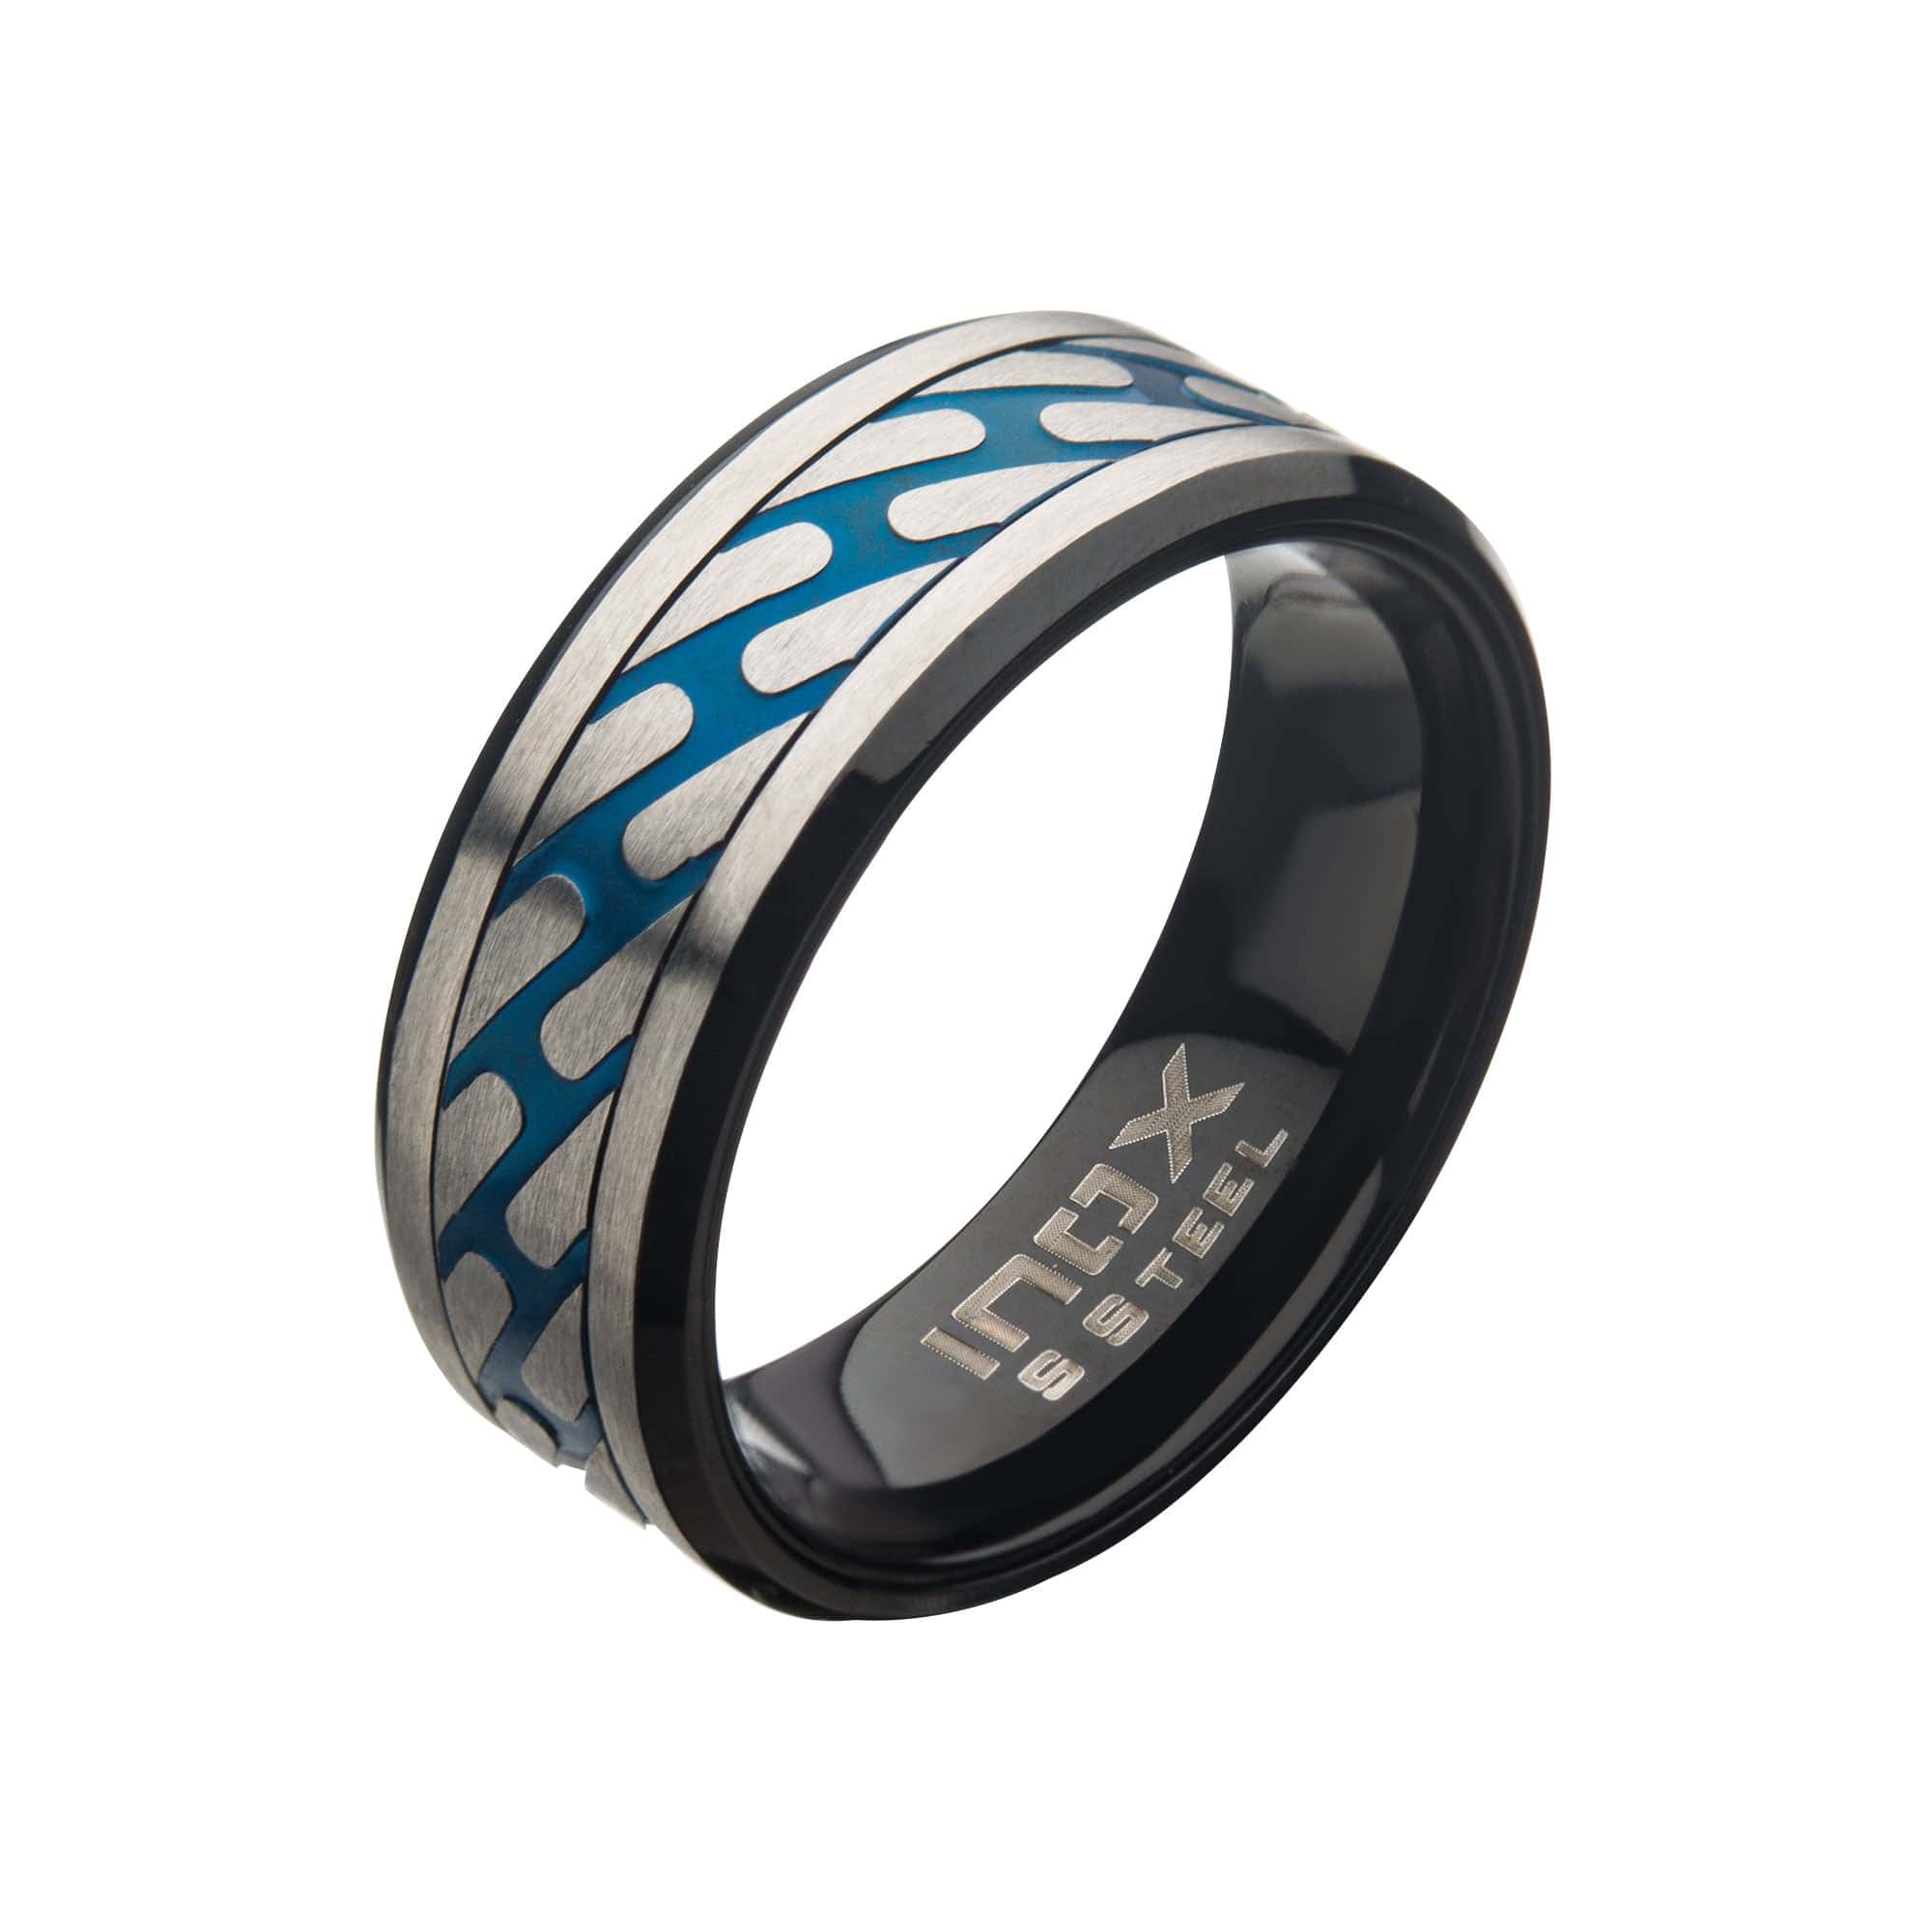 INOX JEWELRY Rings Black and Blue Stainless Steel Matte Finish Curb Chain Pattern Ring